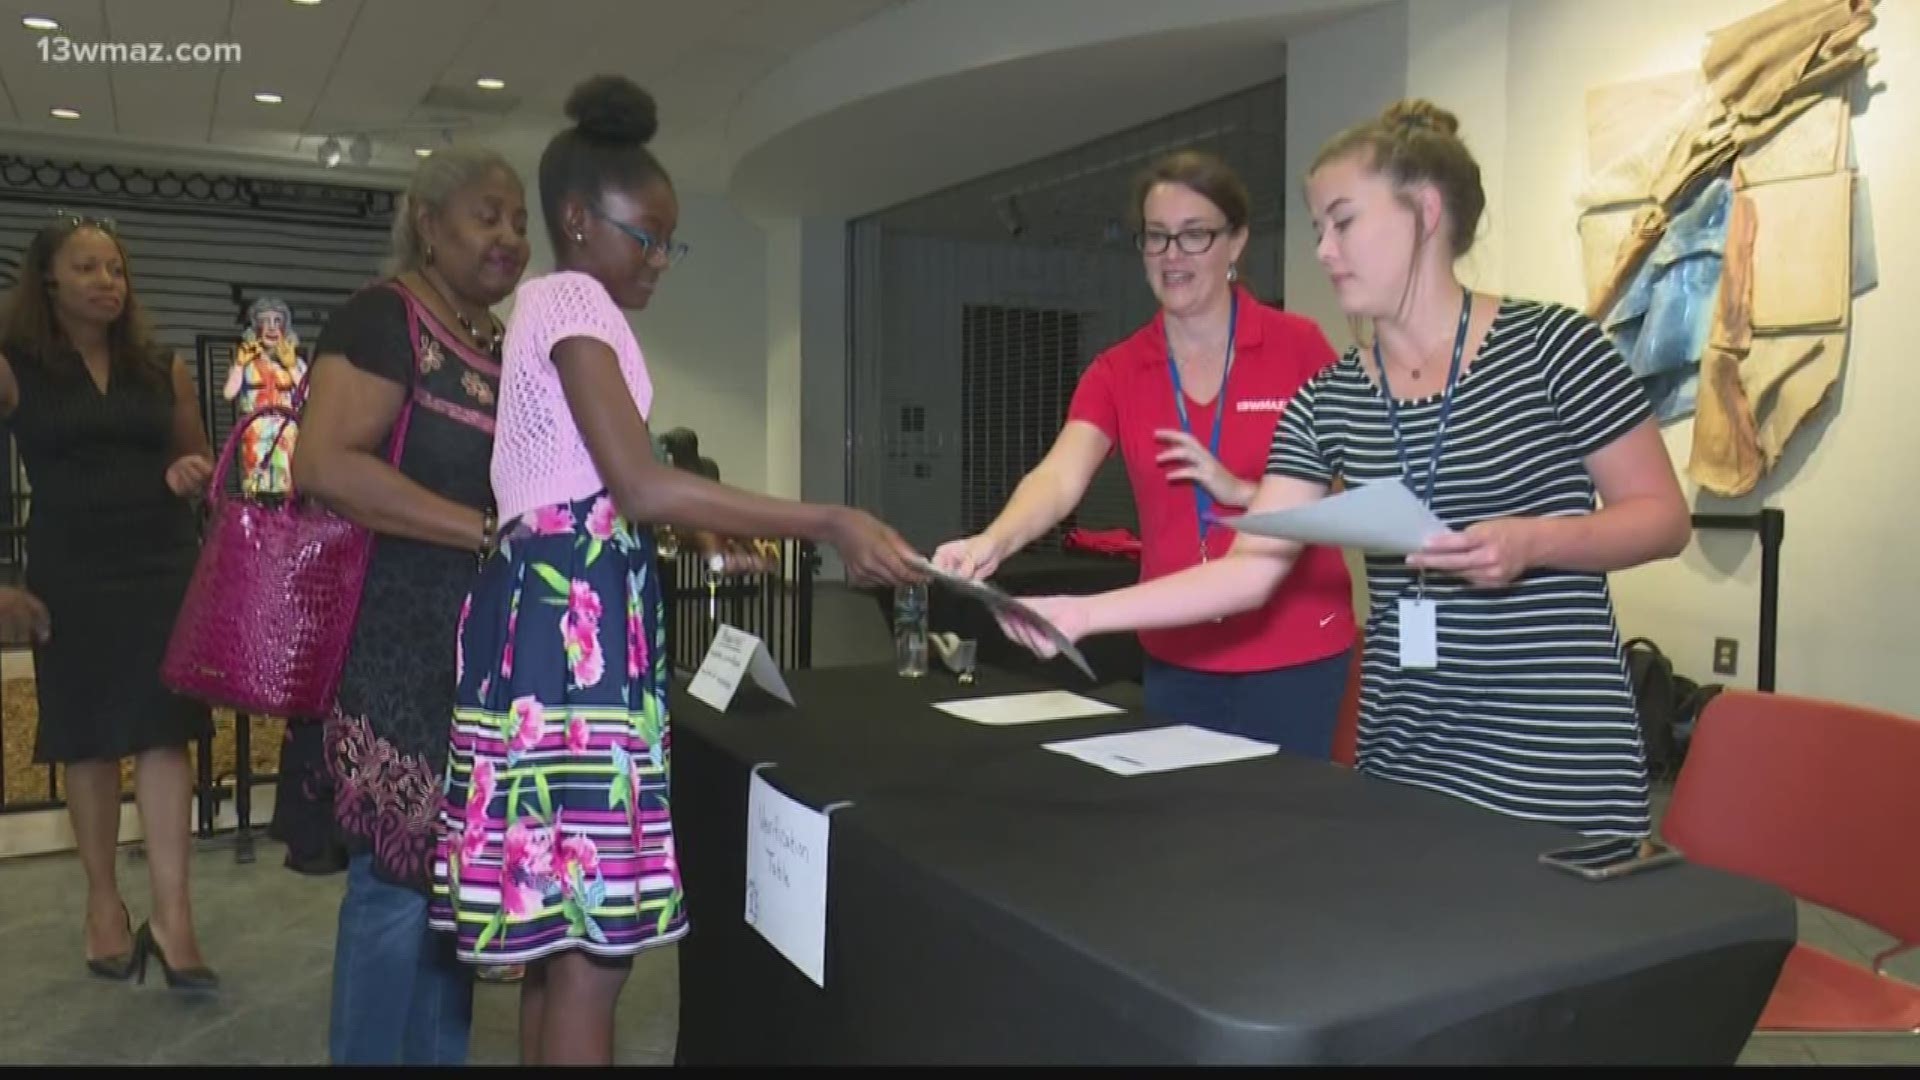 Tuesday, the first round of students auditioned at the Museum of Arts and Sciences for a chance to become a 13WMAZ Junior Journalist. We're looking for a team of 10 students from across Central Georgia to serve for two years, representing 13WMAZ in their communities and working with reporters on stories each week.